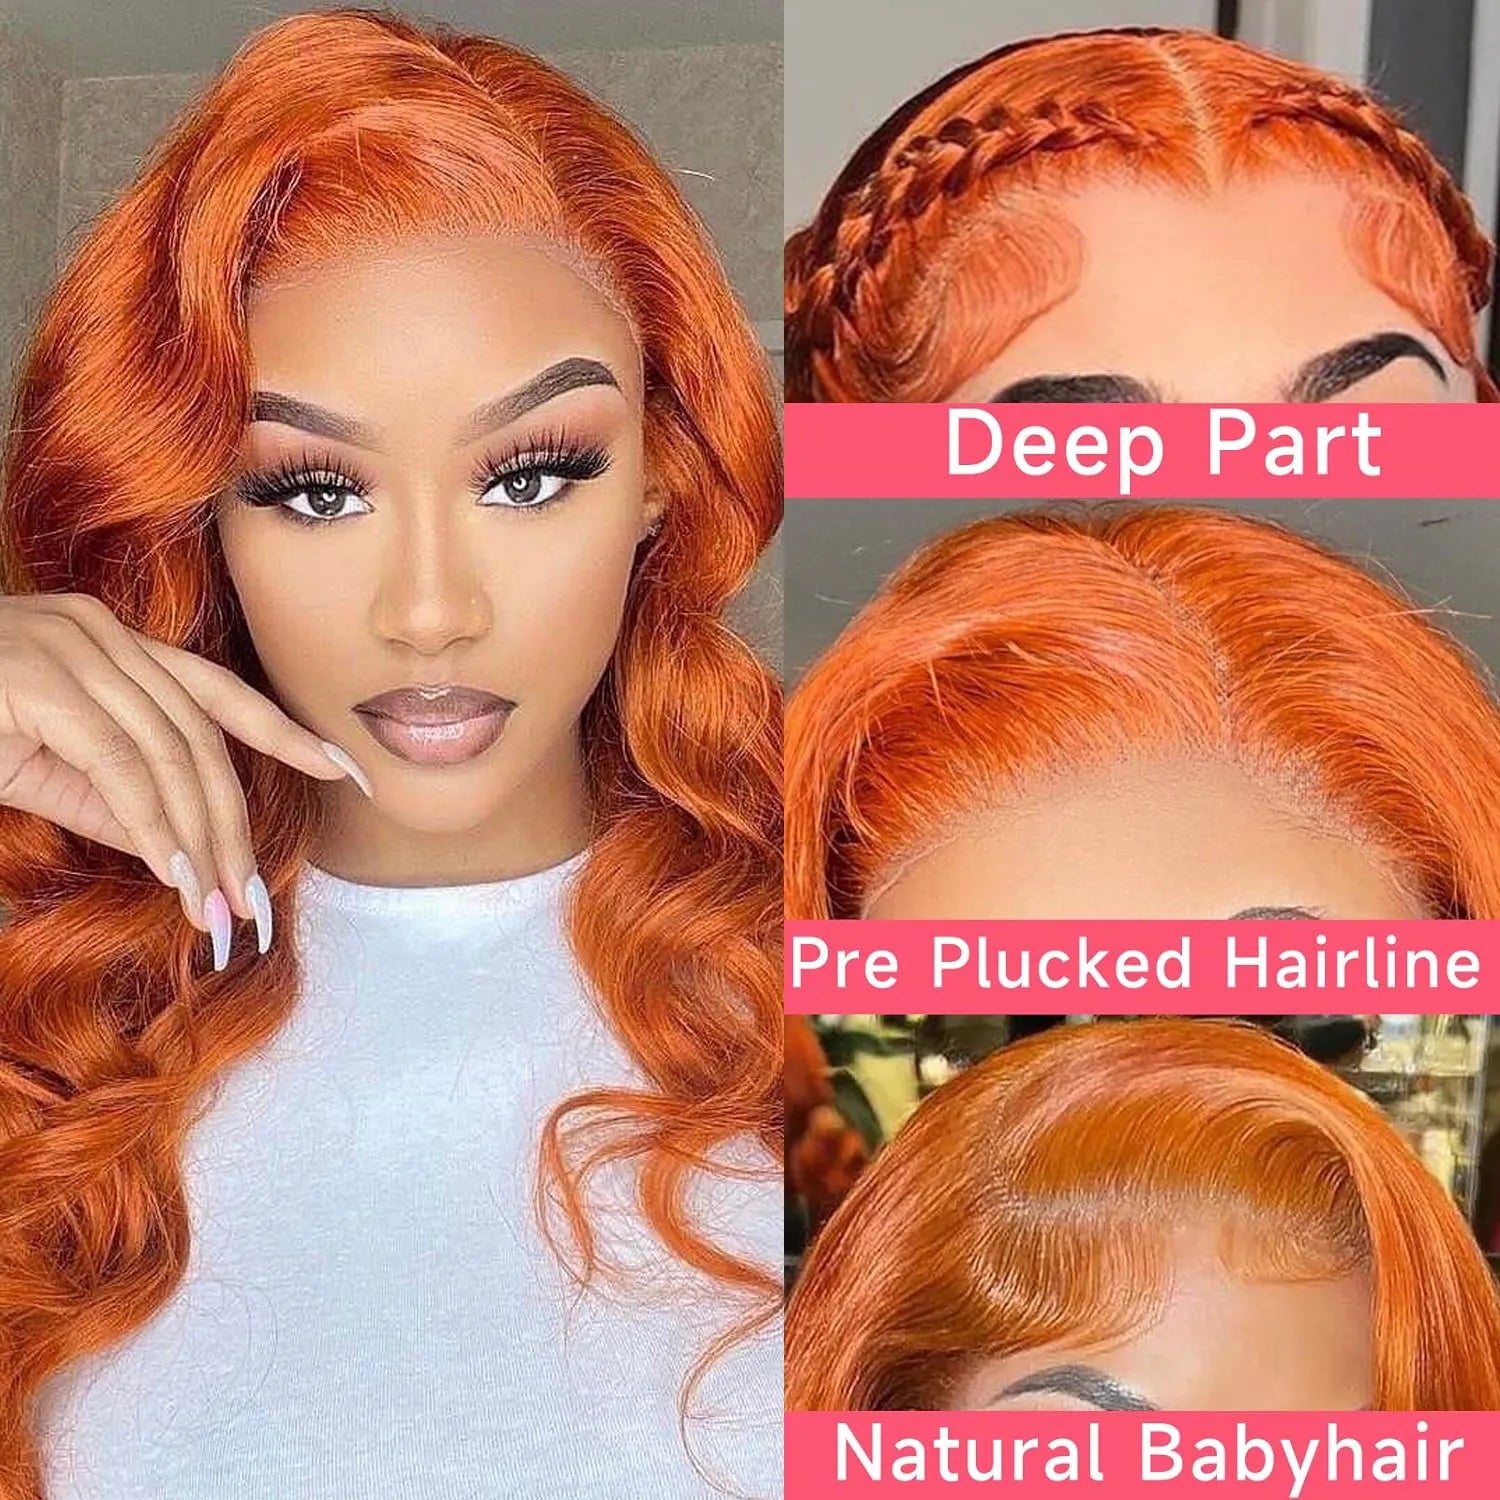 Ginger Wig - Hd Lace Wig 13X6 Human Hair - Body Wave Lace Front Wigs - Pure Hair Gaze